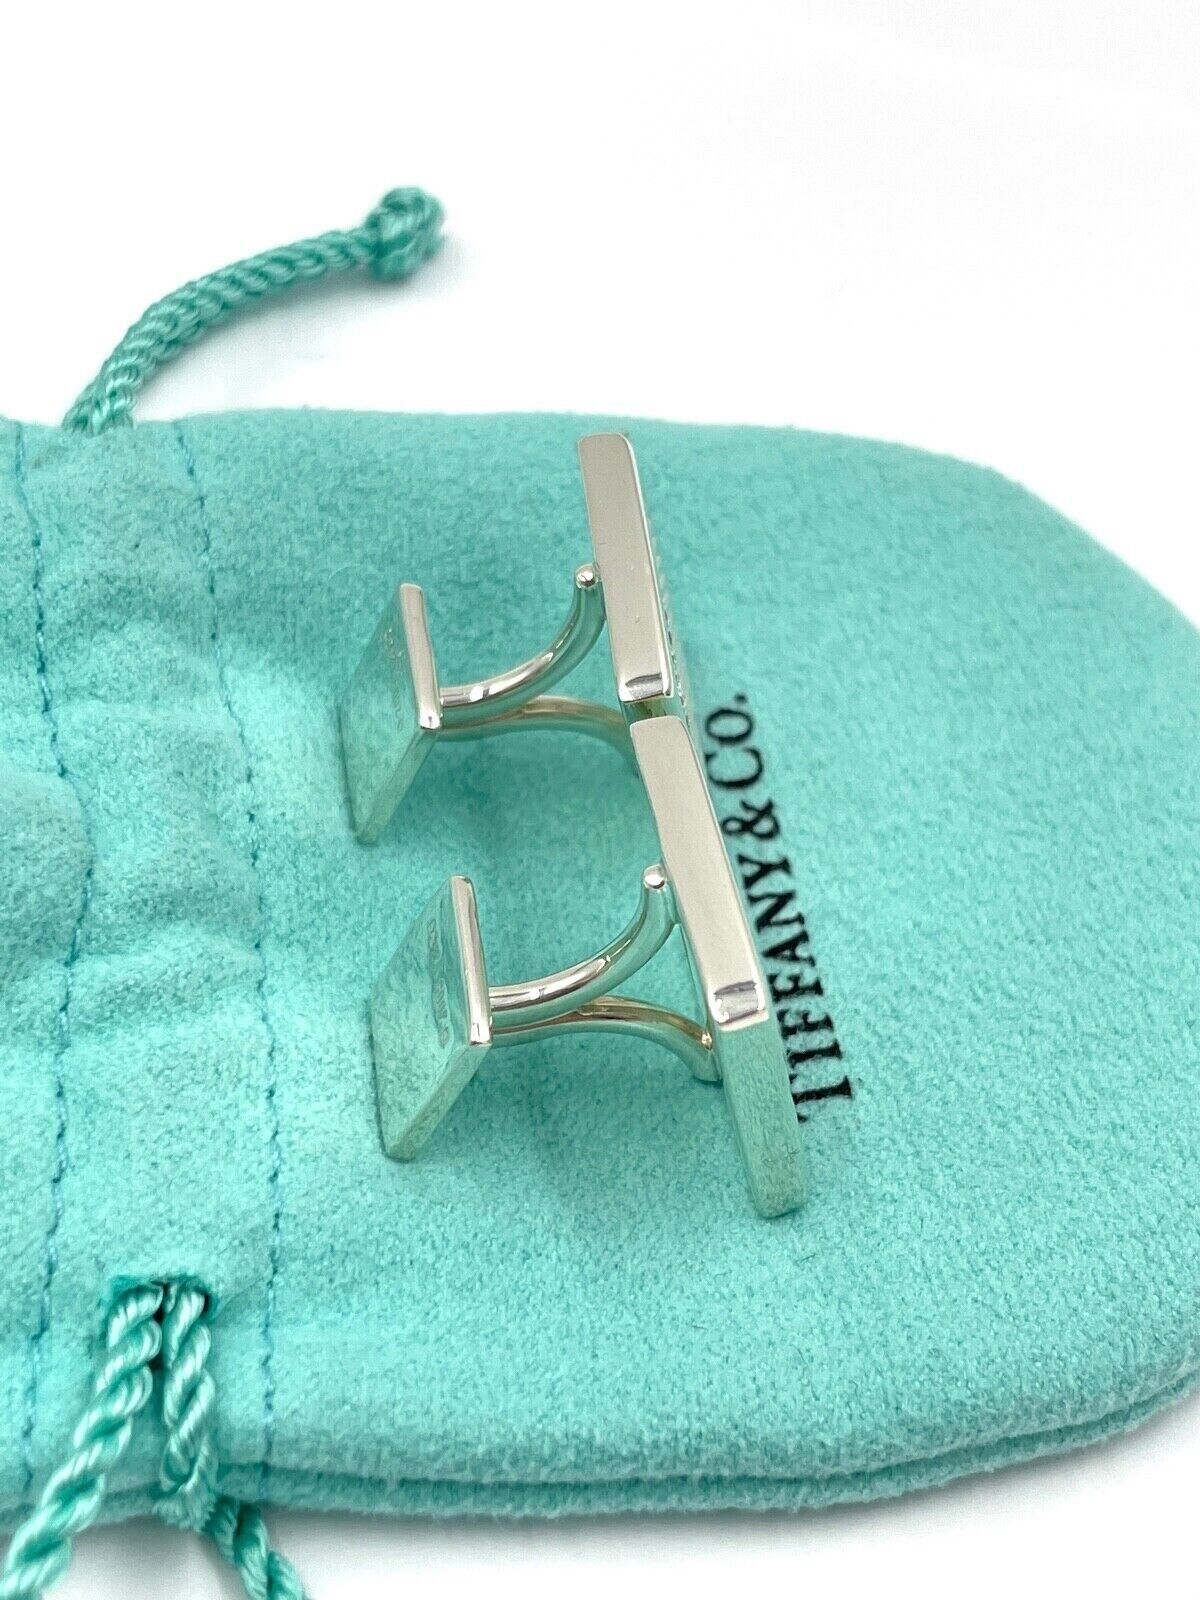 Tiffany & Co. Sterling Silver Square Mesh Cuff Links in Tiffany Pouch